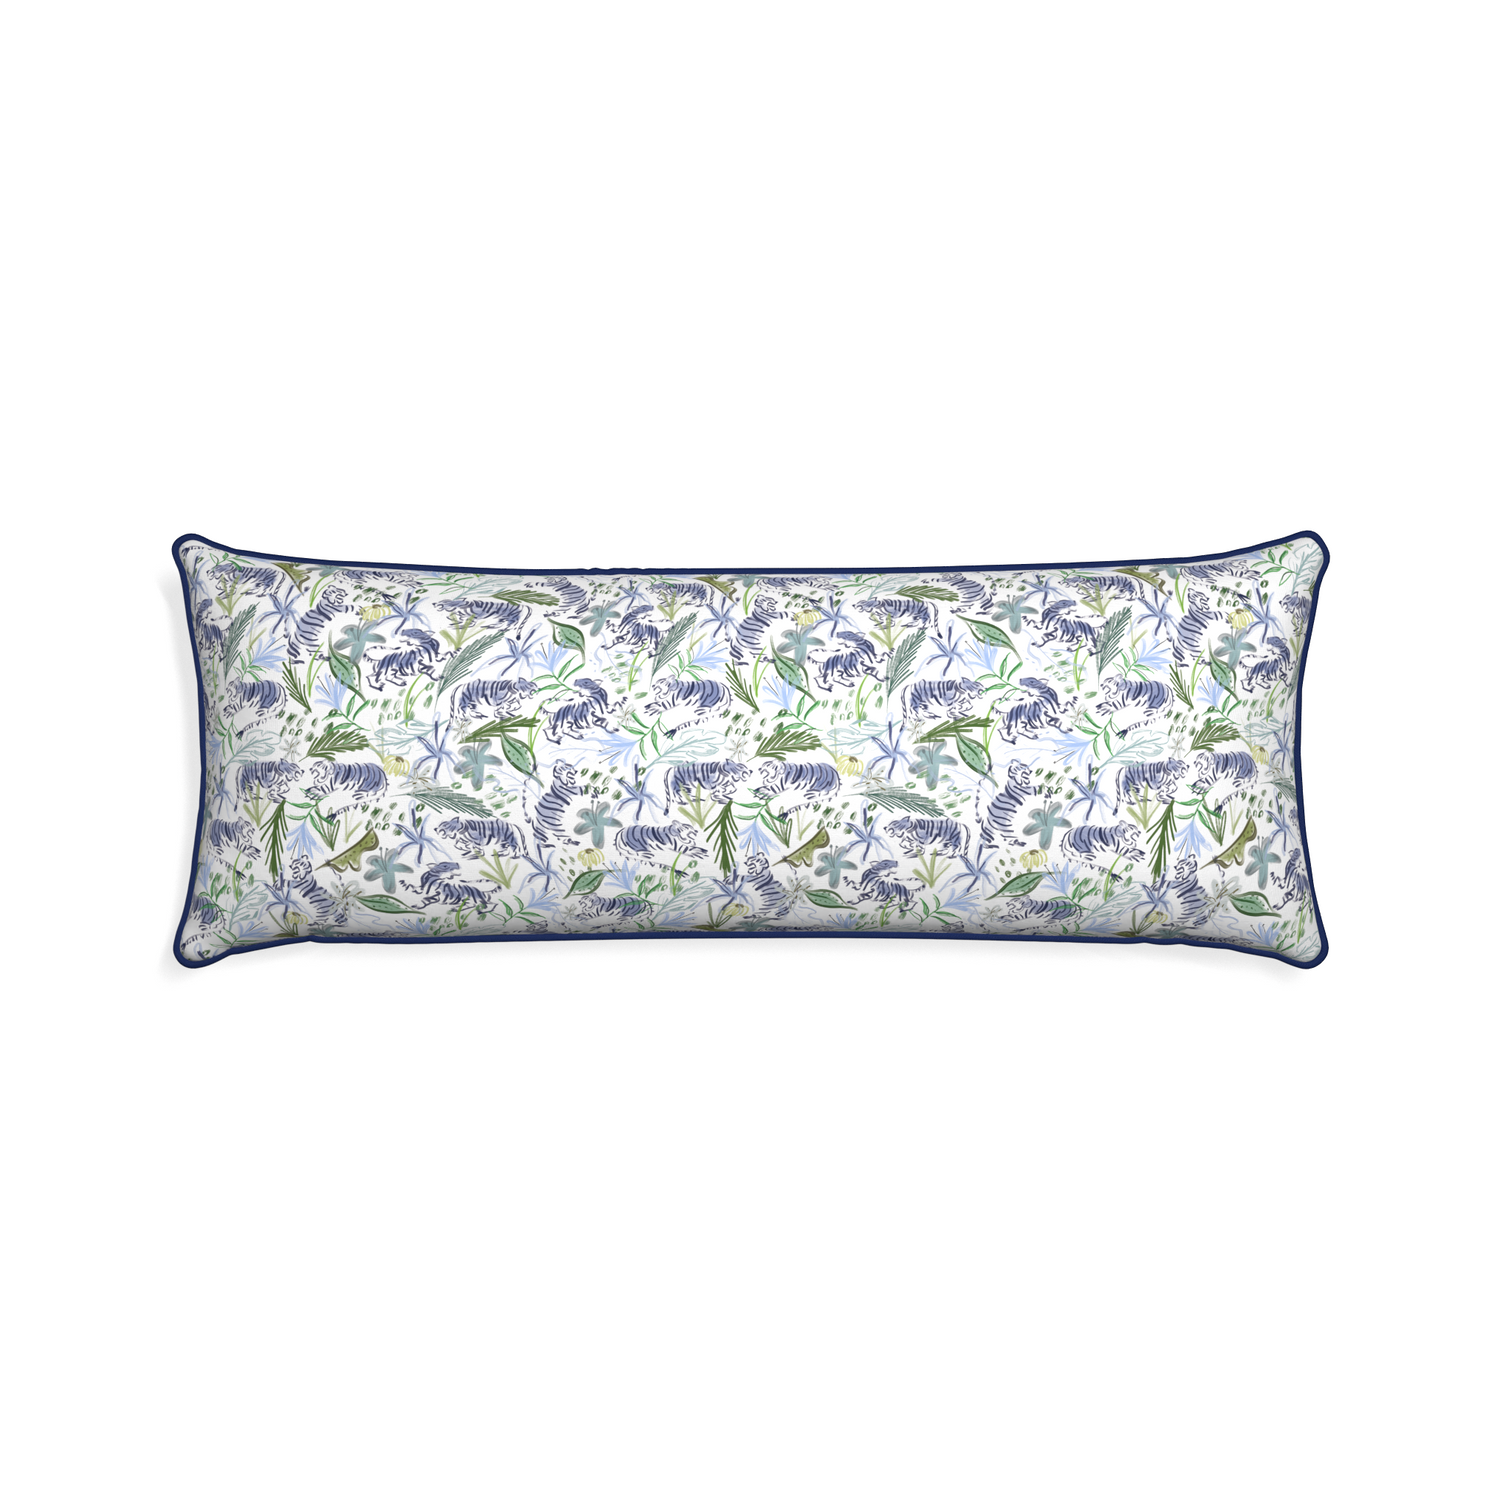 Xl-lumbar frida green custom pillow with midnight piping on white background